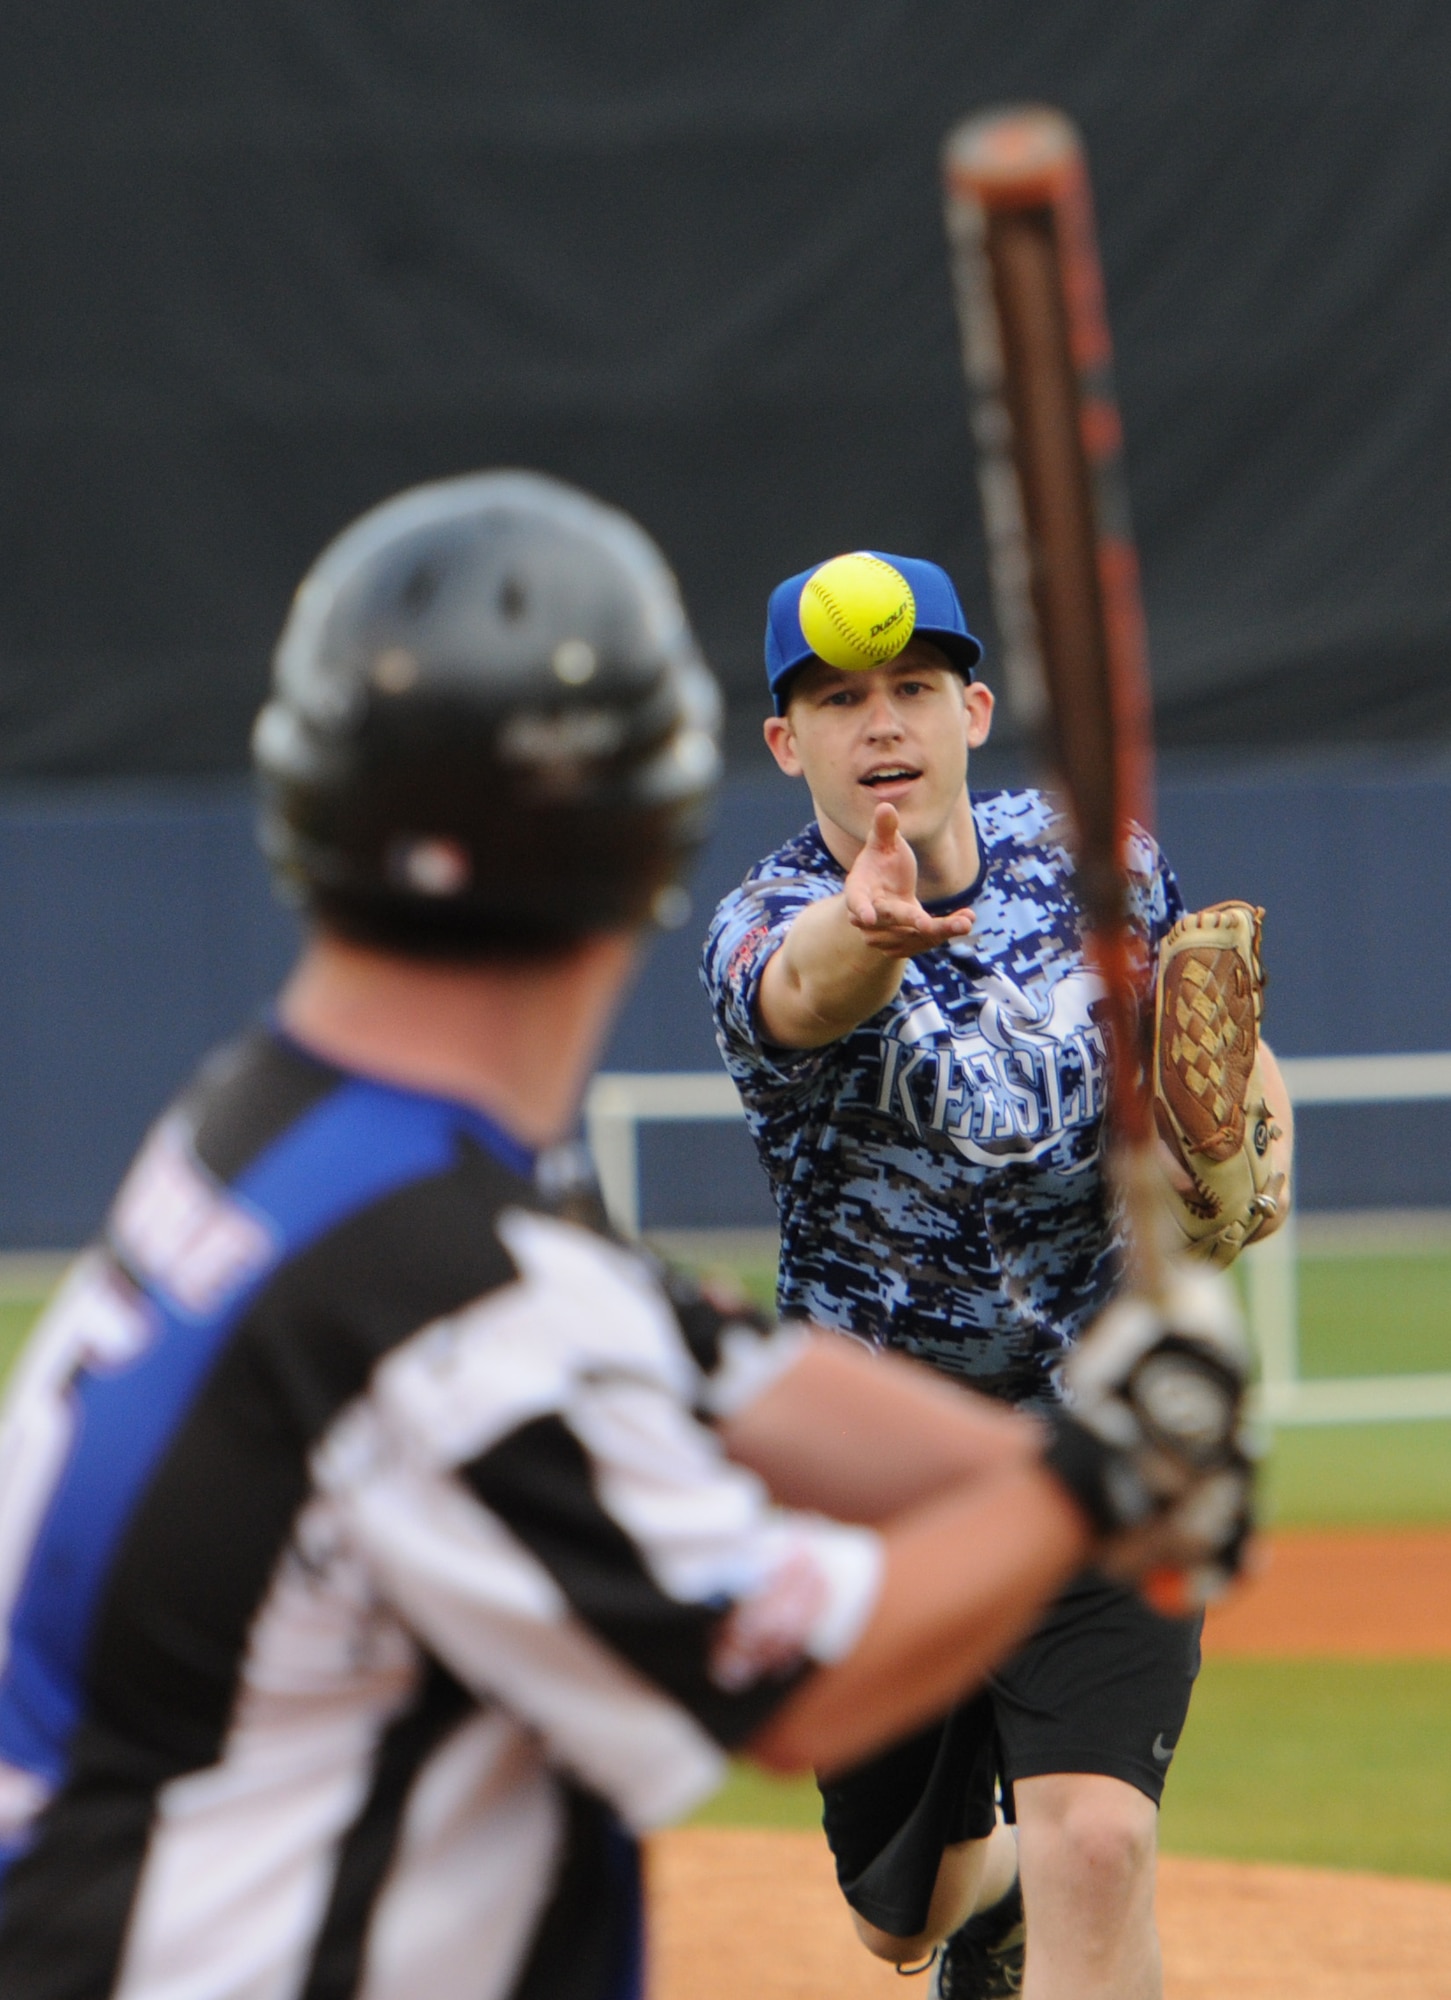 Tyler Bouldin, WLOX reporter and “Boots” team member, pitches a softball to Tony DeRosa, Special Olympics athlete, during the “Boots versus Badges” softball game at the Biloxi Shuckers MGM Park April 21, 2016, Biloxi, Miss. The game was the kickoff event for the 2016 Special Olympics Mississippi Summer Games, which will be hosted by Keesler Air Force Base, Miss., May 20-21.  (U.S. Air Force photo by Kemberly Groue)